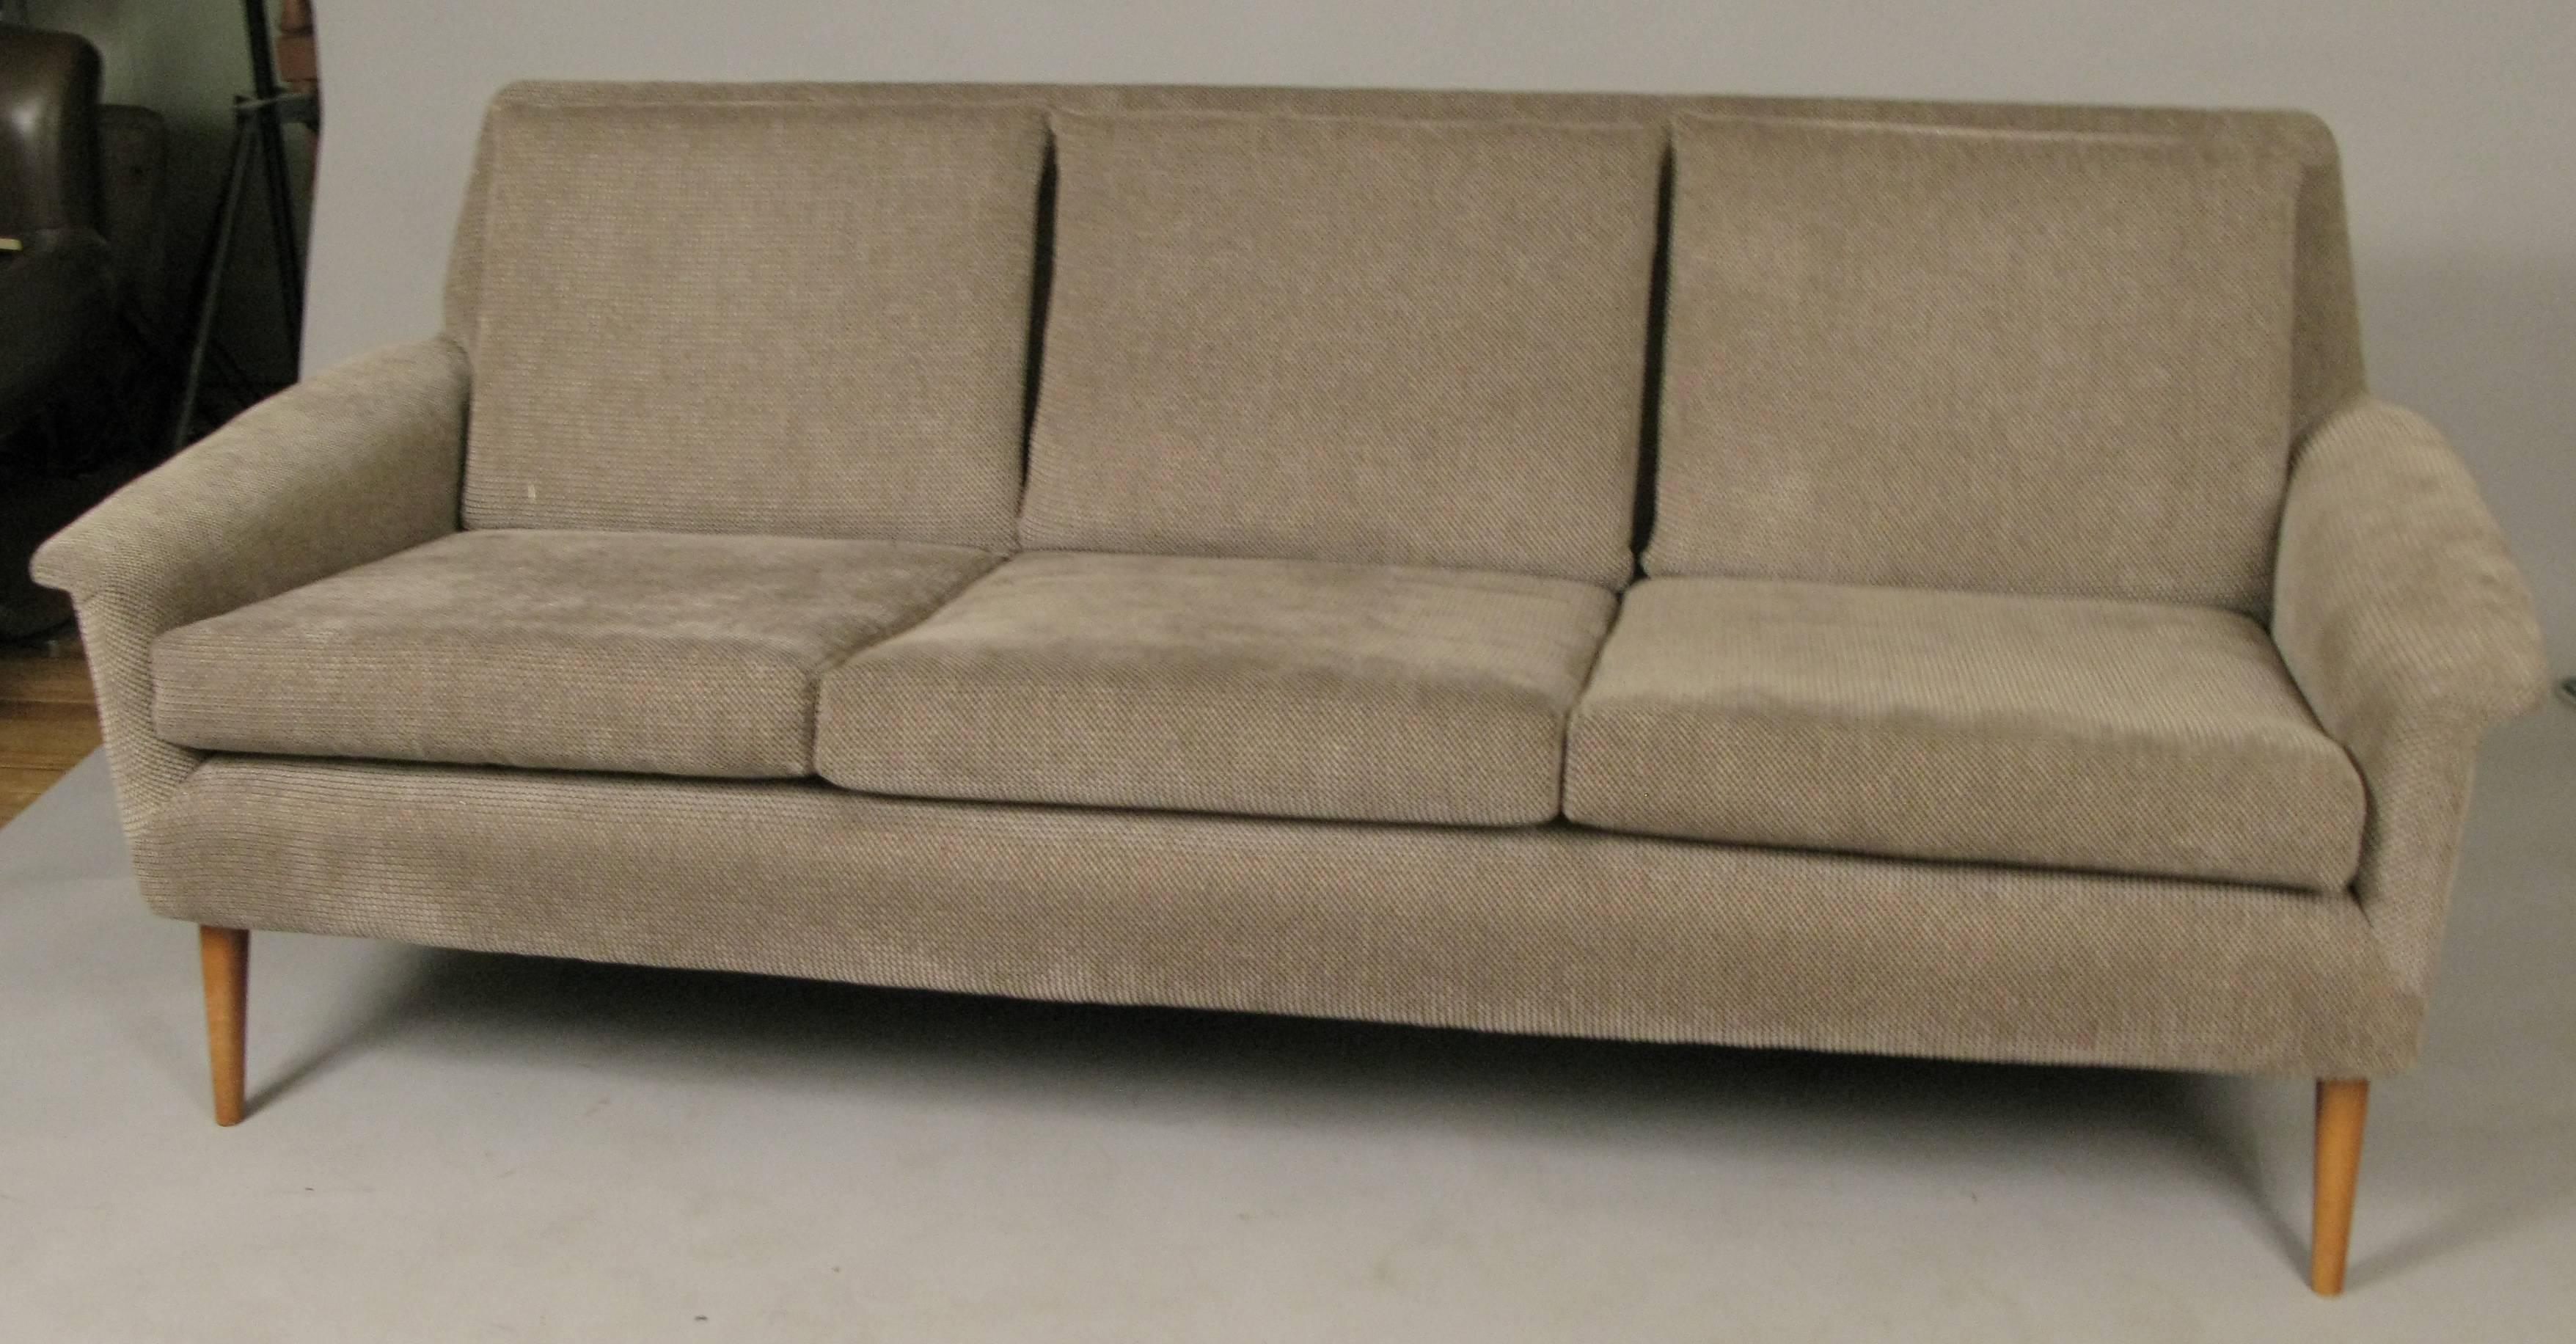 A beautiful vintage 1960s three-seat sofa designed by Folke Ohlsson for DUX, with solid birch frame and legs, and subtle wing arms, upholstered in a soft and comfortable woven fabric.